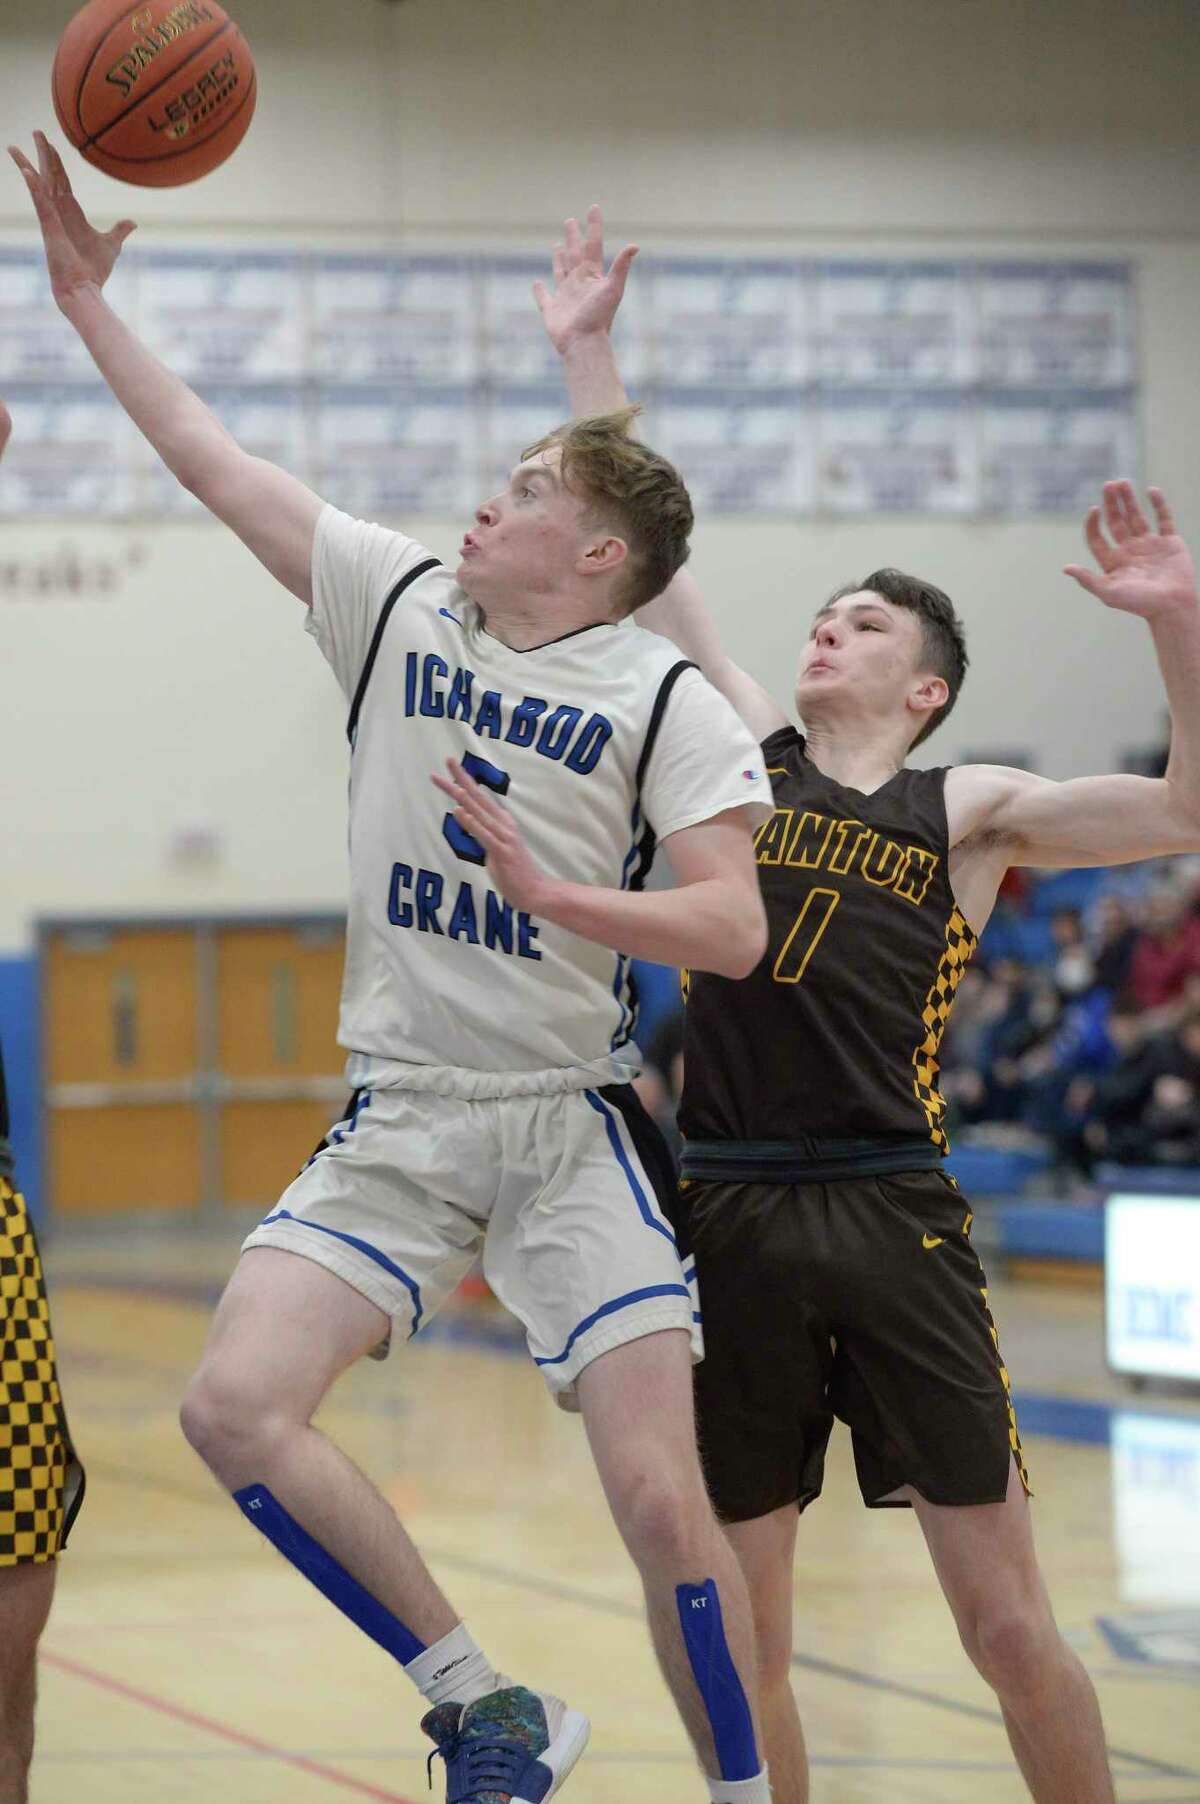 Ichabod Crane's Alex Schmidt maneuvers past Canton's Luke Wentworth for a shot on the hoop during their Class B state sub-regional on Tuesday, Mar. 8, 2022, in Saratoga Springs, N.Y. (Jenn March, Special to the Times Union)